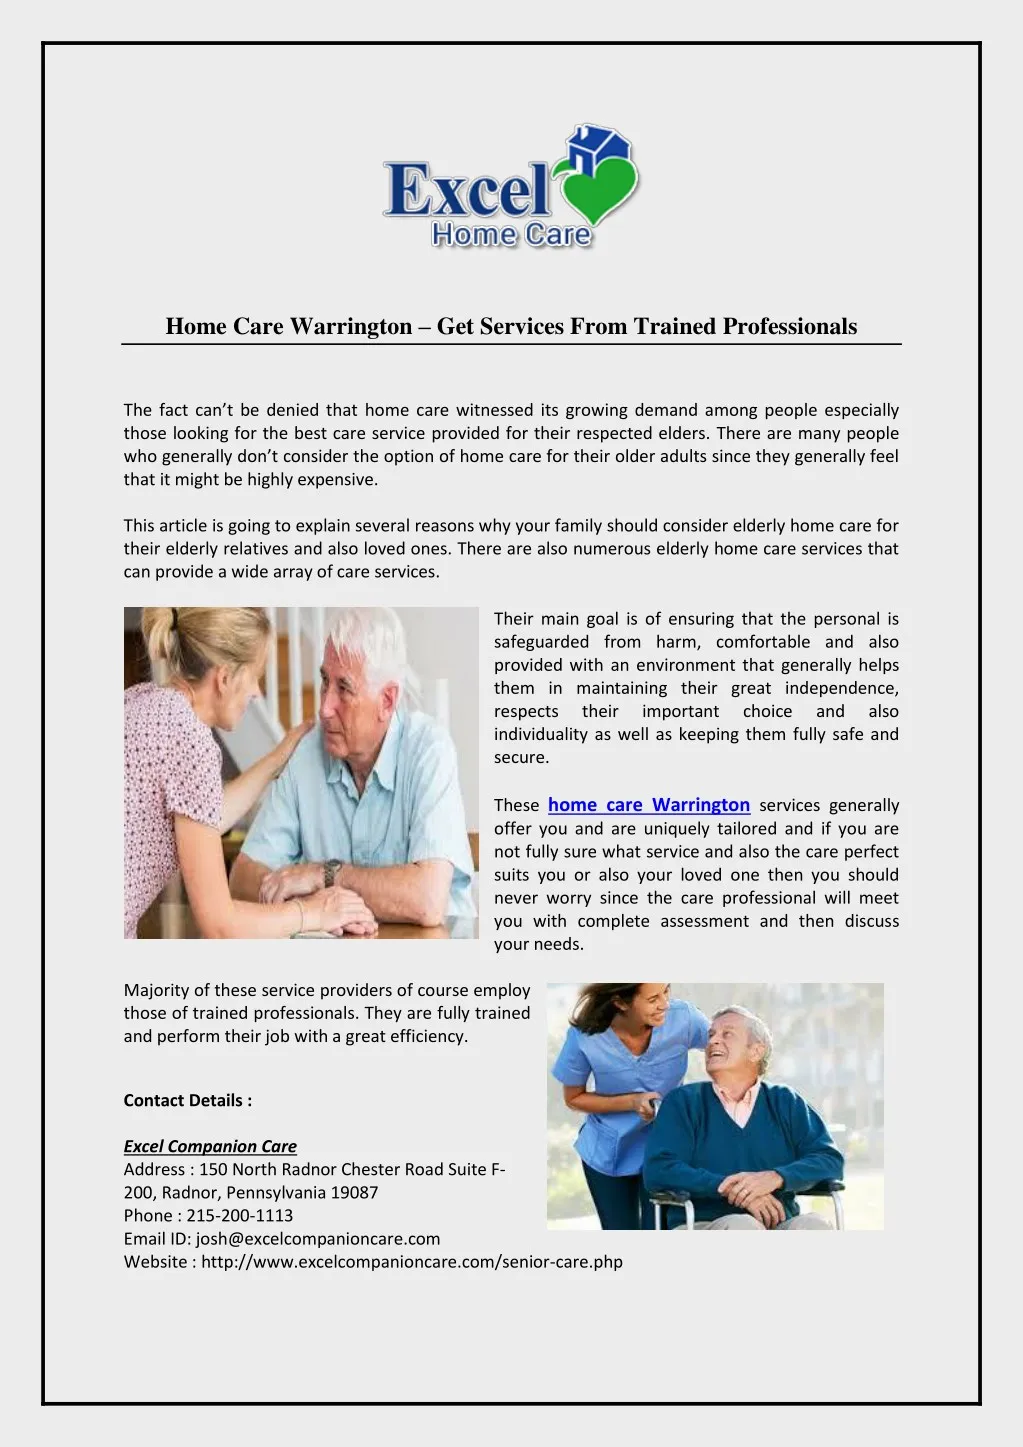 home care warrington get services from trained